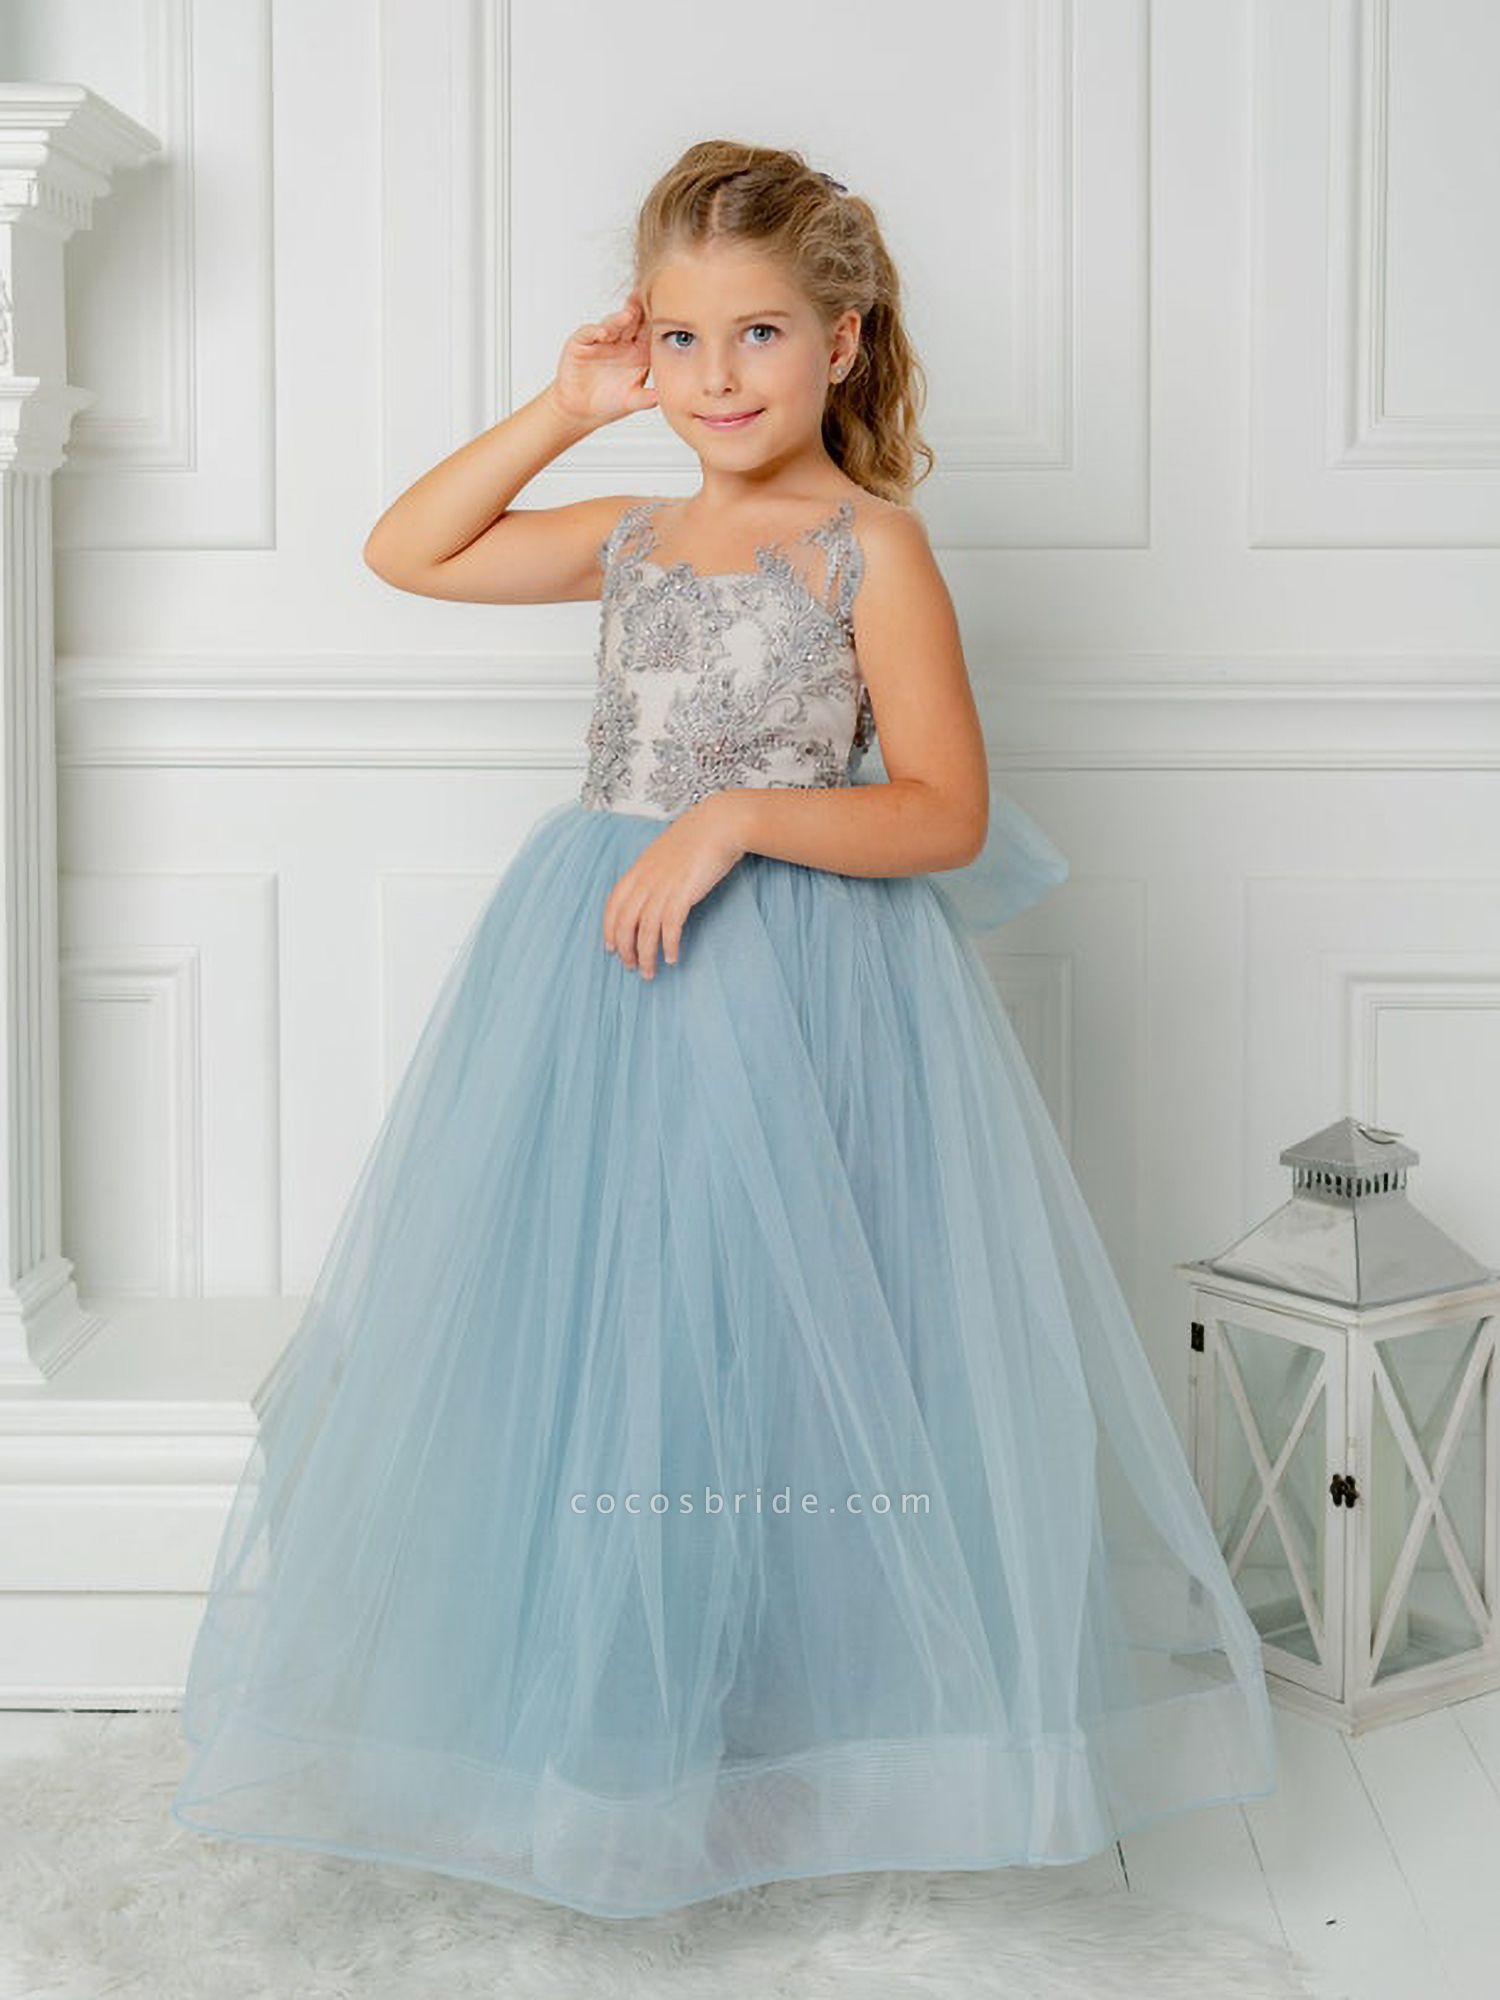 Cute Long A-line Tulle Boho Flower Girls Dresses with bow